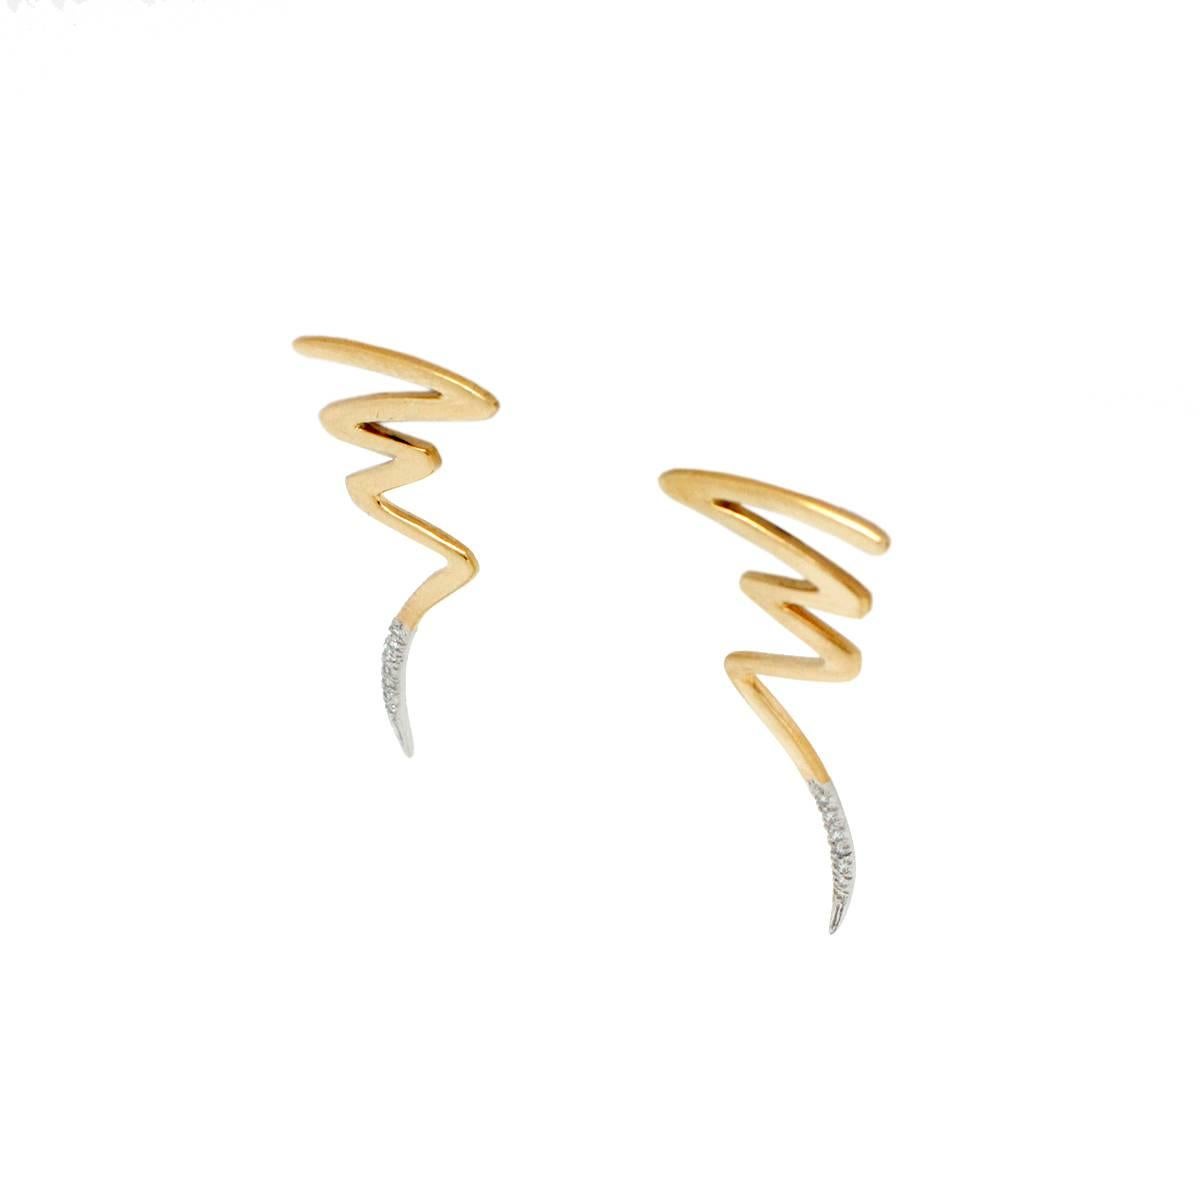 Paloma Picasso agreed to produce jewelry in France for Tiffany & Co. after an already very successful career in minimalist expression contemporary jewelry. These miniature lightning bolts are absolutely gorgeous set in 18k yellow gold and containing